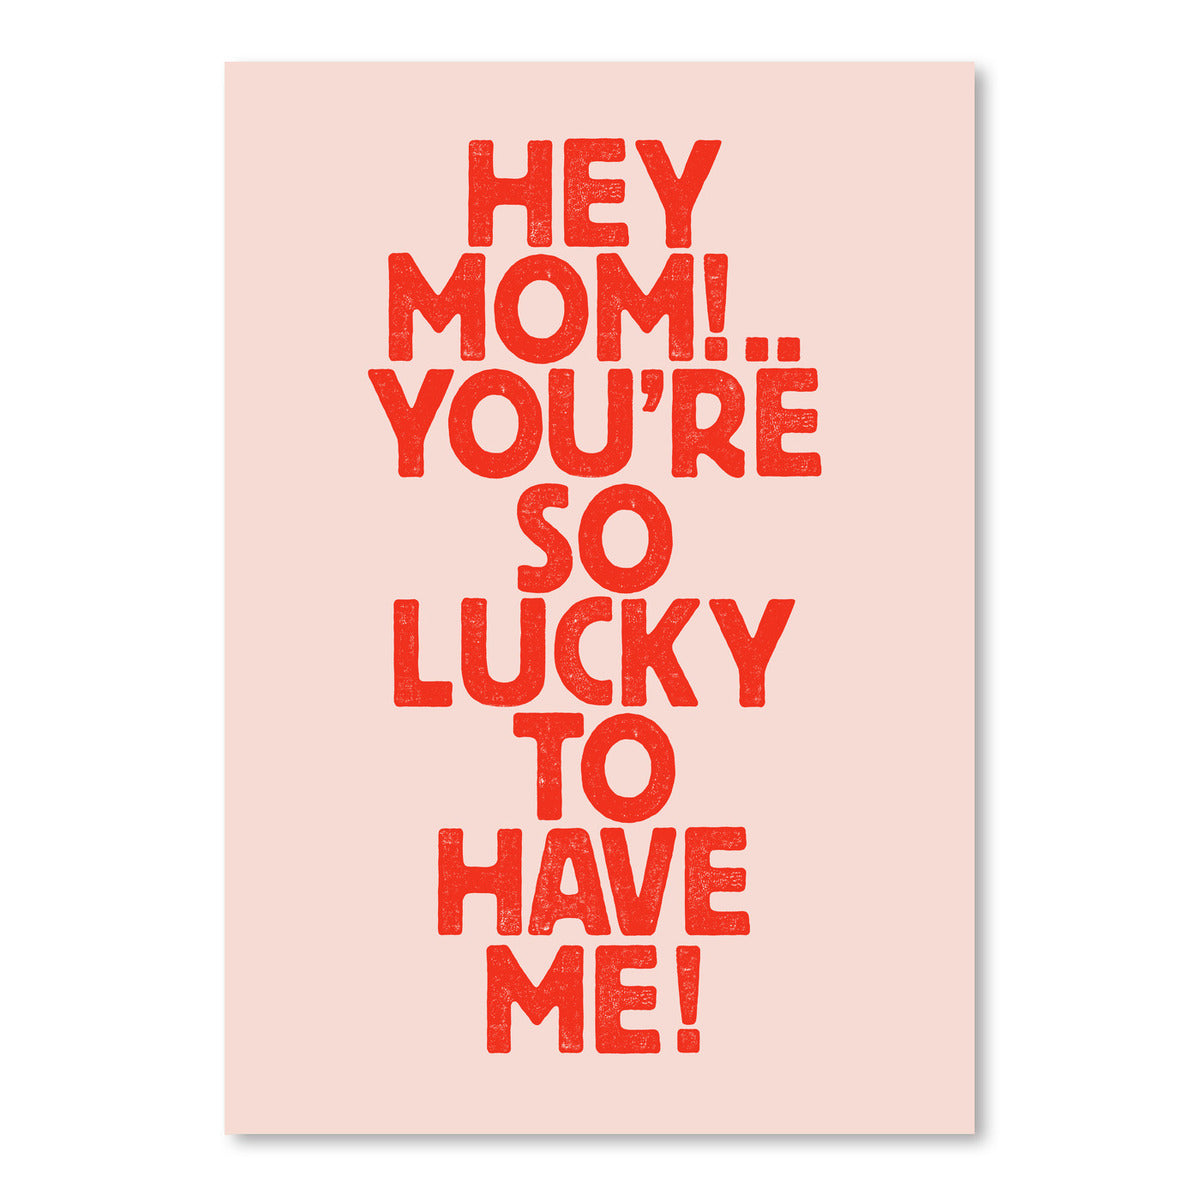 Hey Mom YouRe So Lucky To Have Me by Motivated Type - Art Print - Americanflat